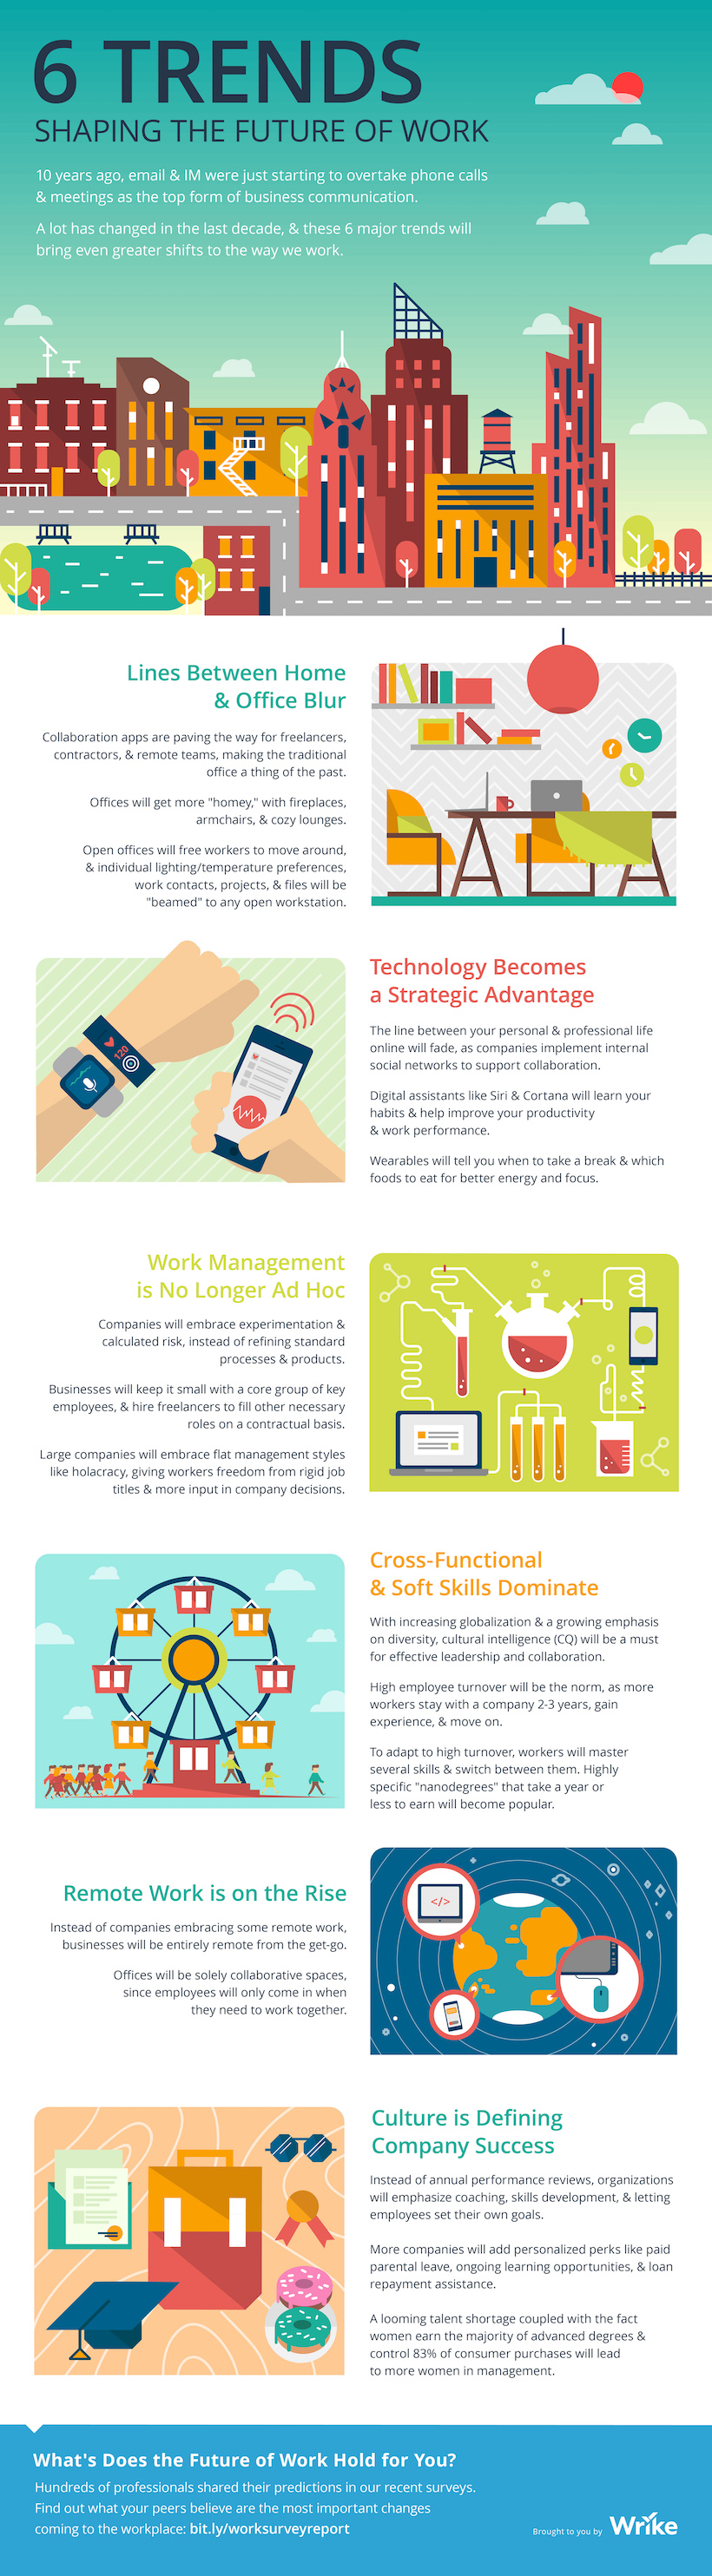 6 Trends Shaping the Future of Work (Infographic)